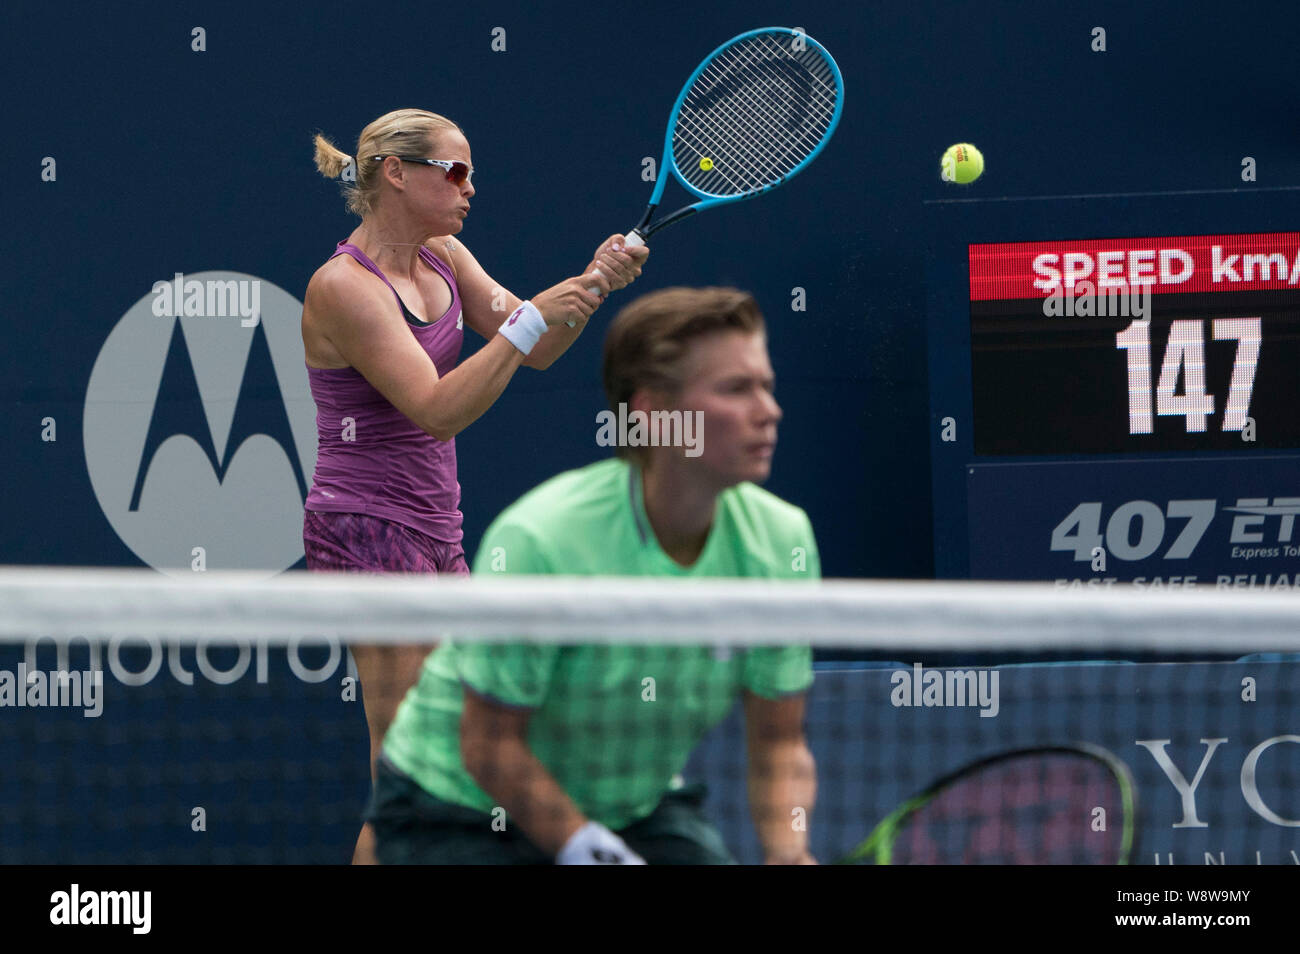 Toronto, Canada. 11th Aug, 2019. Anna-Lena Groenefeld (L) of Germany and Demi Schuurs of the Netherlands compete during the women's doubles final against Barbora Krejcikova and Katerina Siniakova of the Czech Republic at the 2019 Rogers Cup in Toronto, Canada, Aug. 11, 2019. Credit: Zou Zheng/Xinhua/Alamy Live News Stock Photo